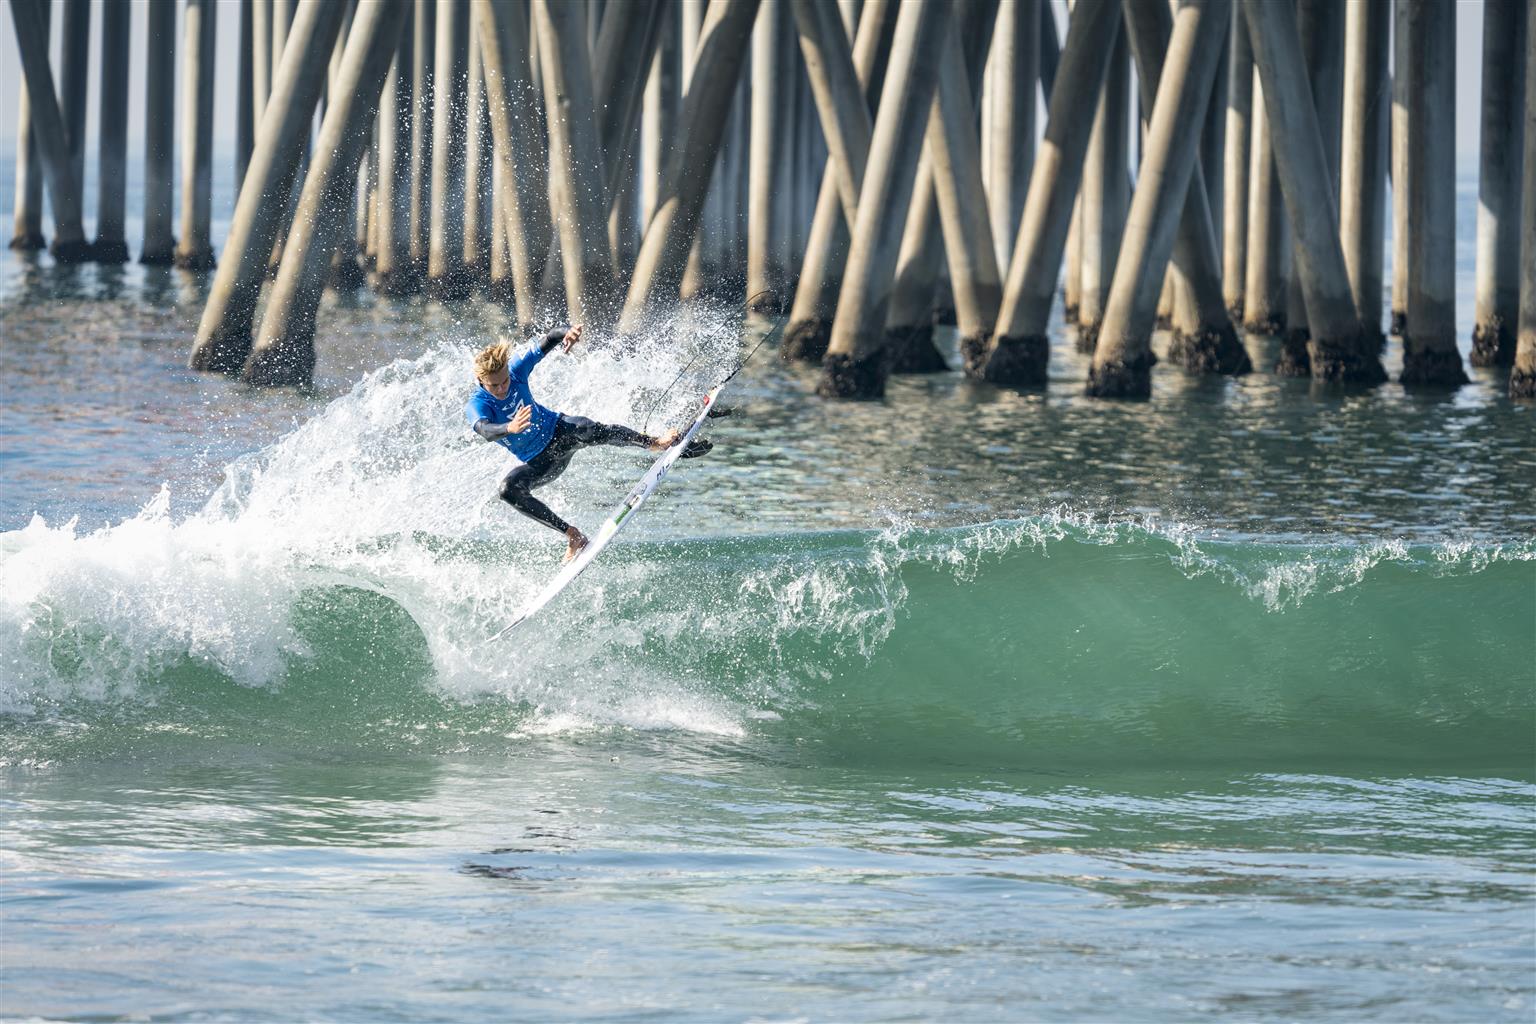 Tommy Coleman does 360 off one-foot wave to win Labor Day Surf Fest